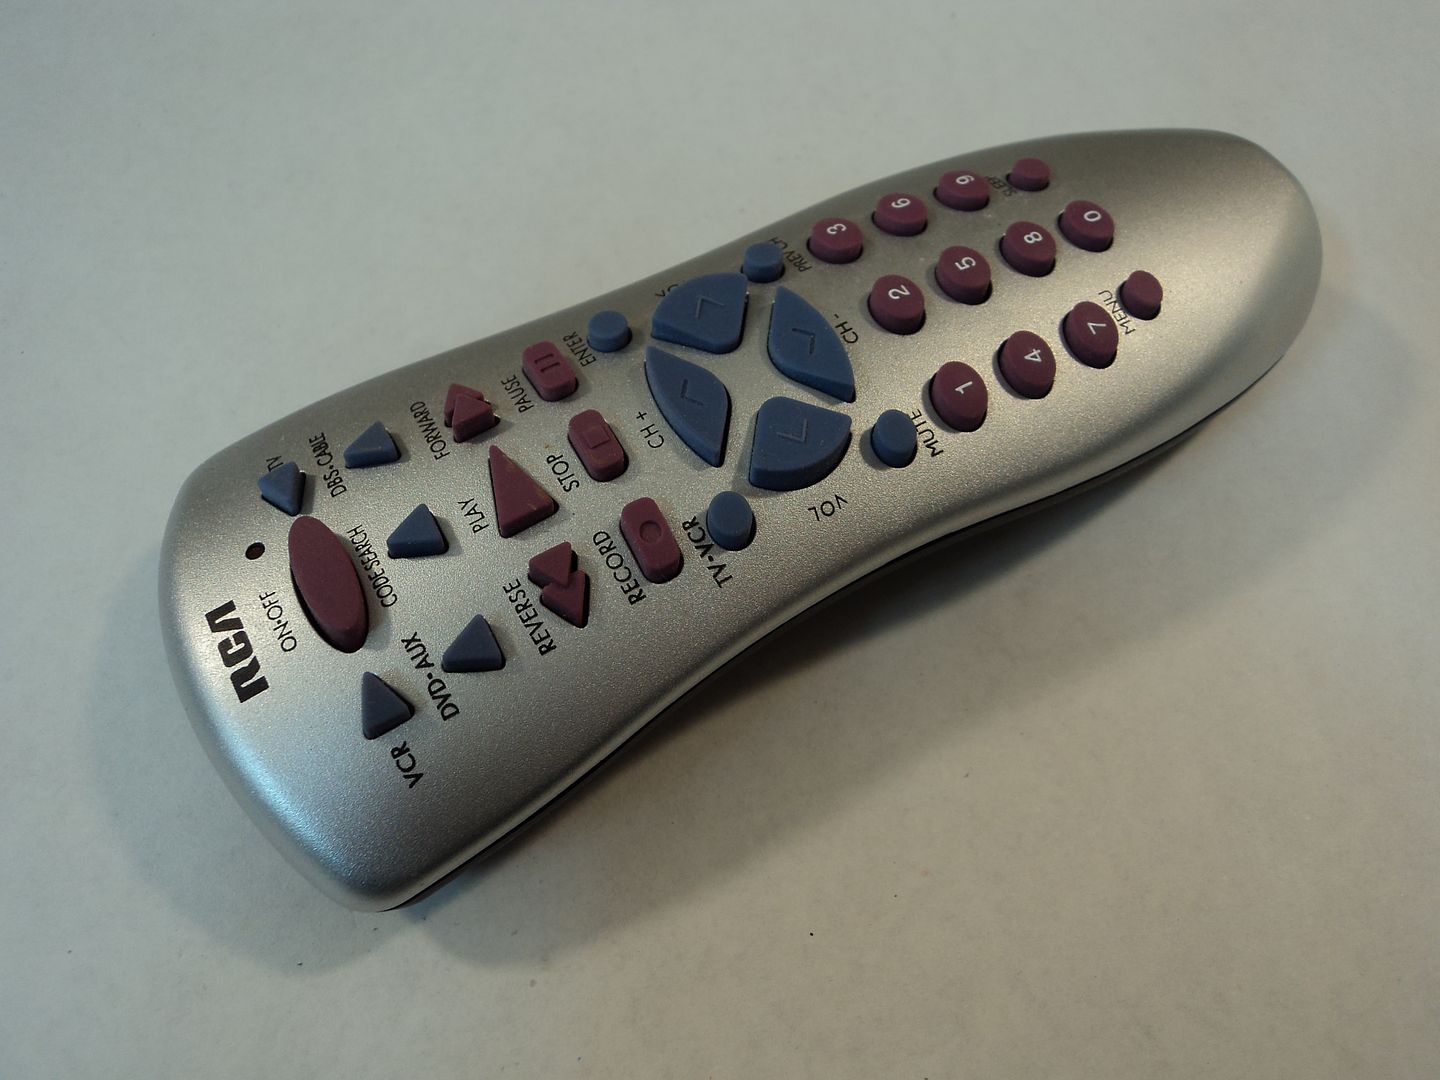 How To Program RCA Universal Remote To ONN TV